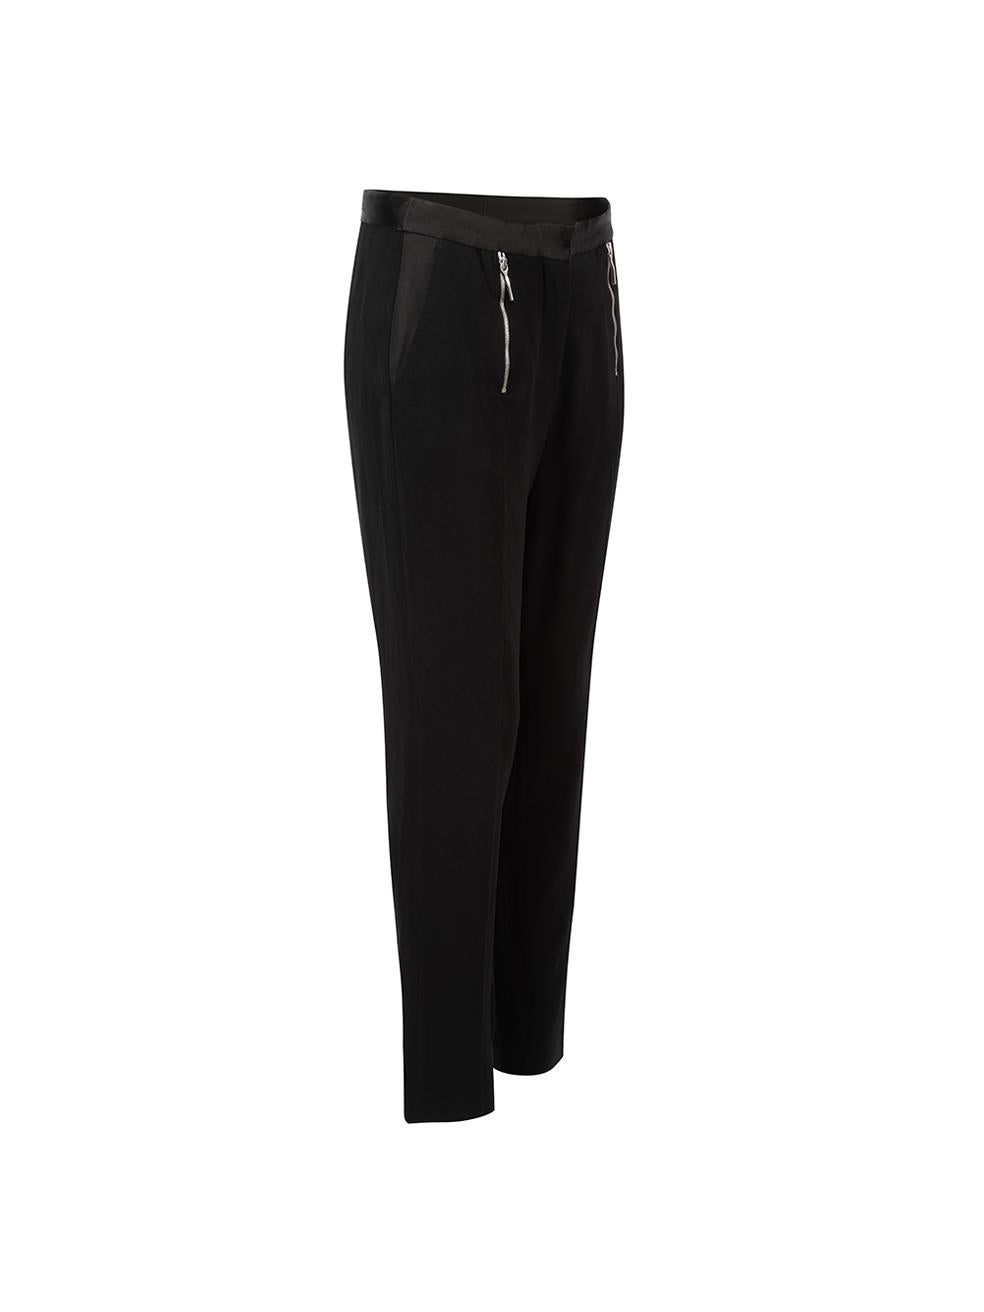 CONDITION is Good. Minor wear to trousers is evident. Light wear to waistband fabric at centre back on this used Costume National designer resale item.



Details


Black

Synthetic

Trousers

Slim fit

Mid rise

Satin waistband

2x Zip front